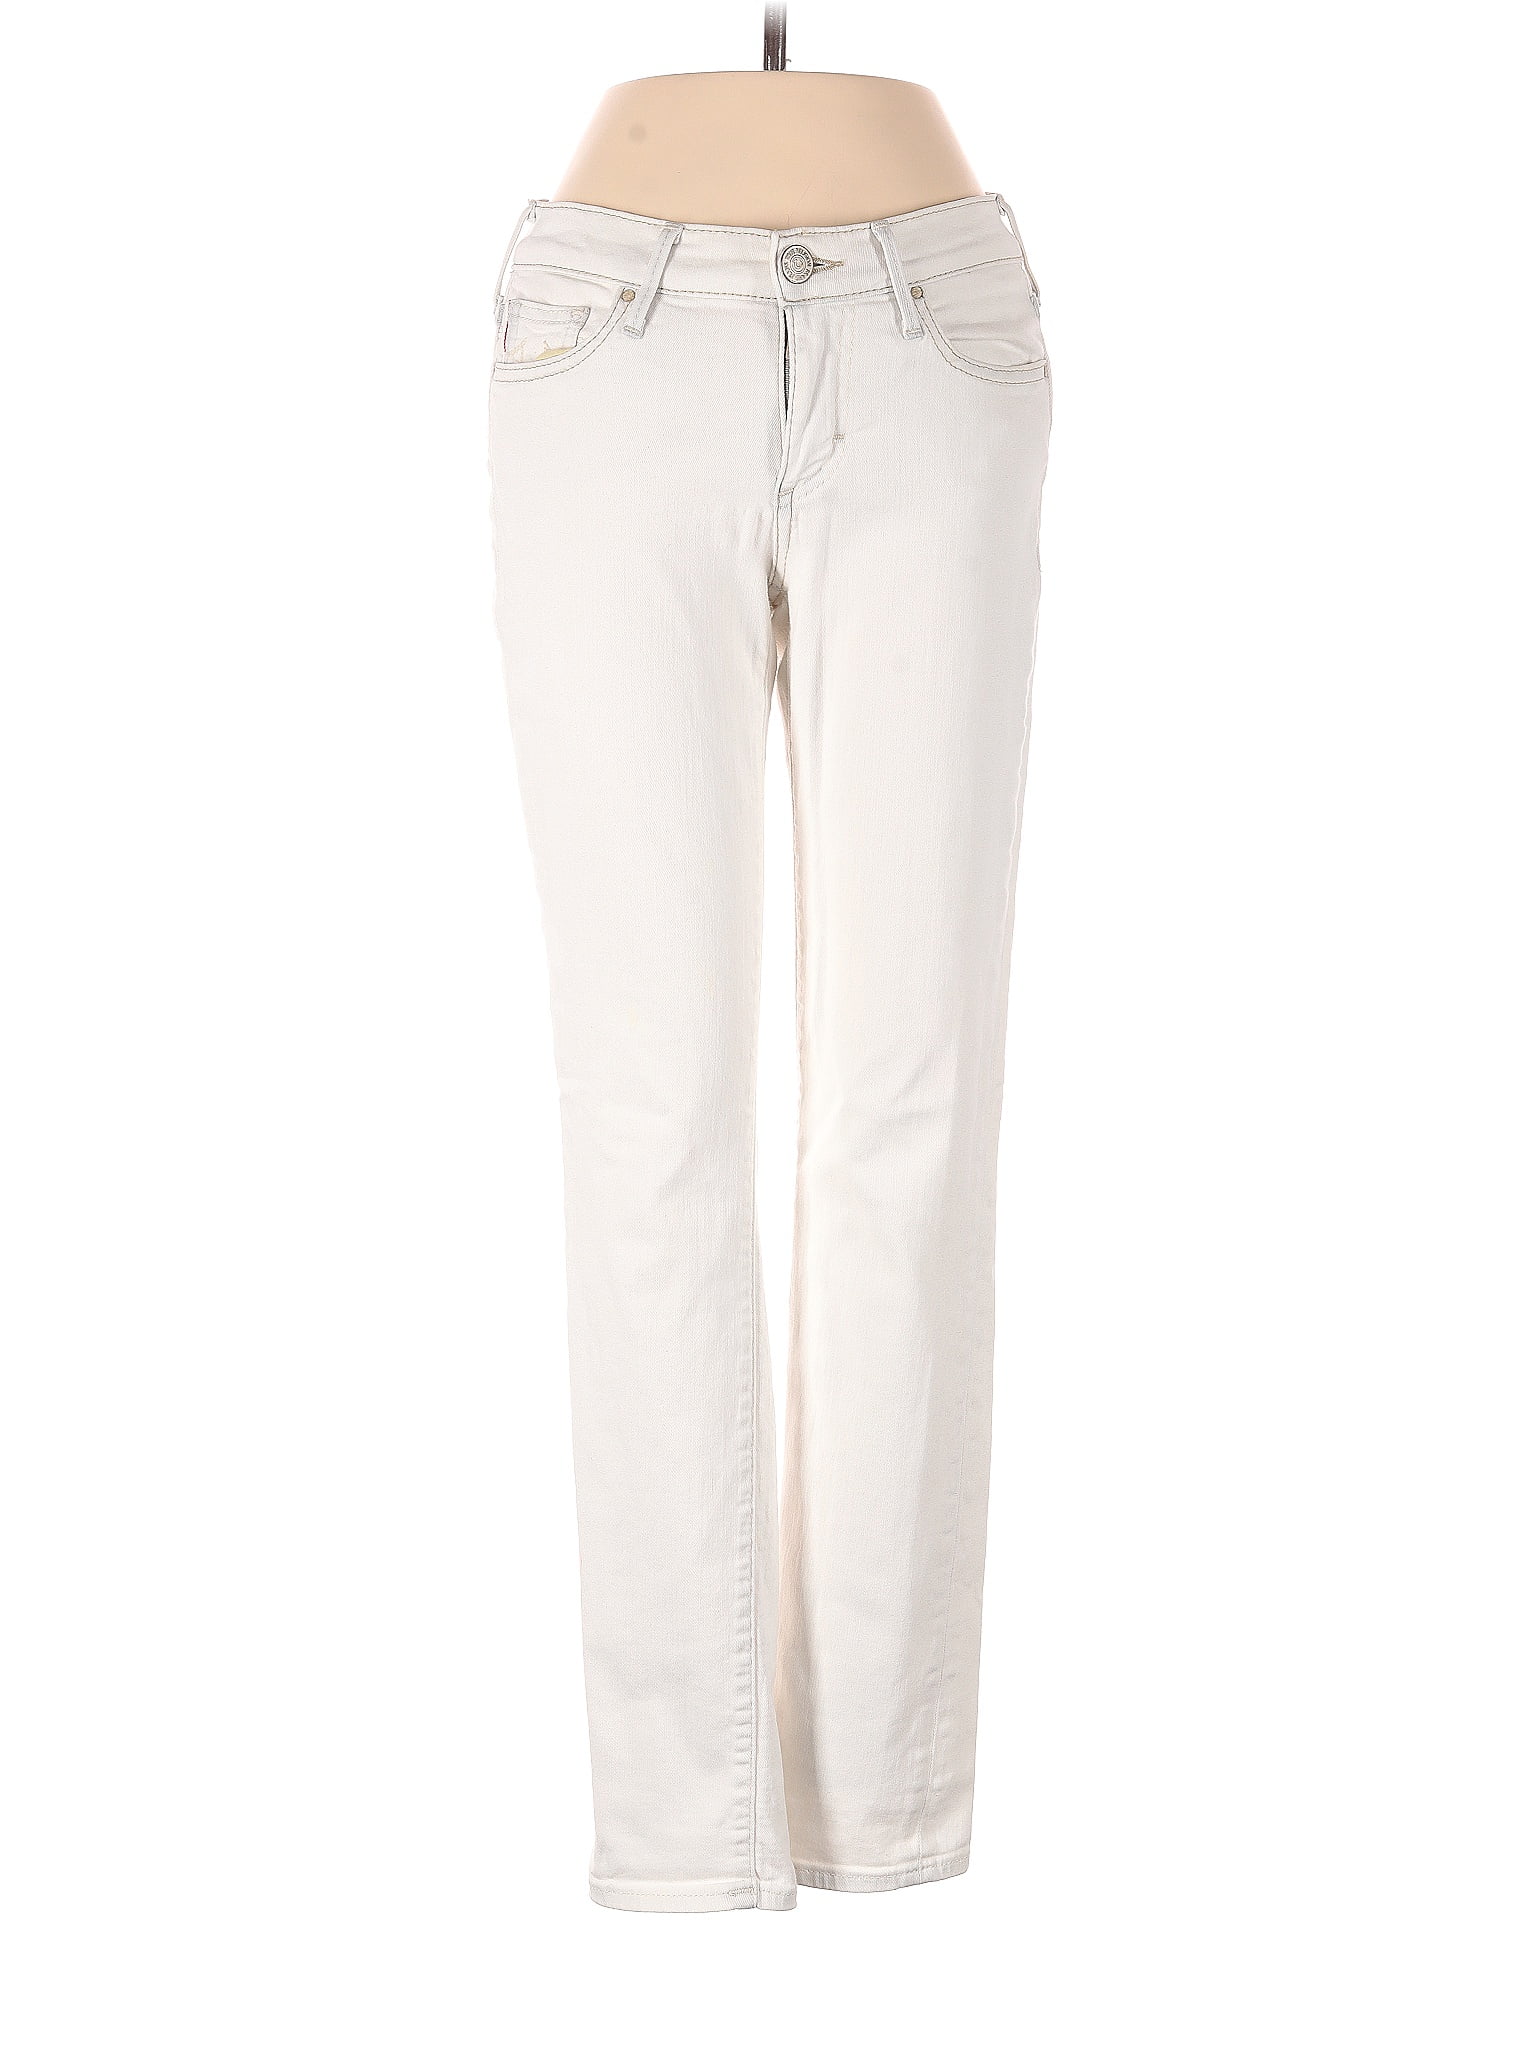 Vince. Solid Ivory Jeans Size 12 - 79% off